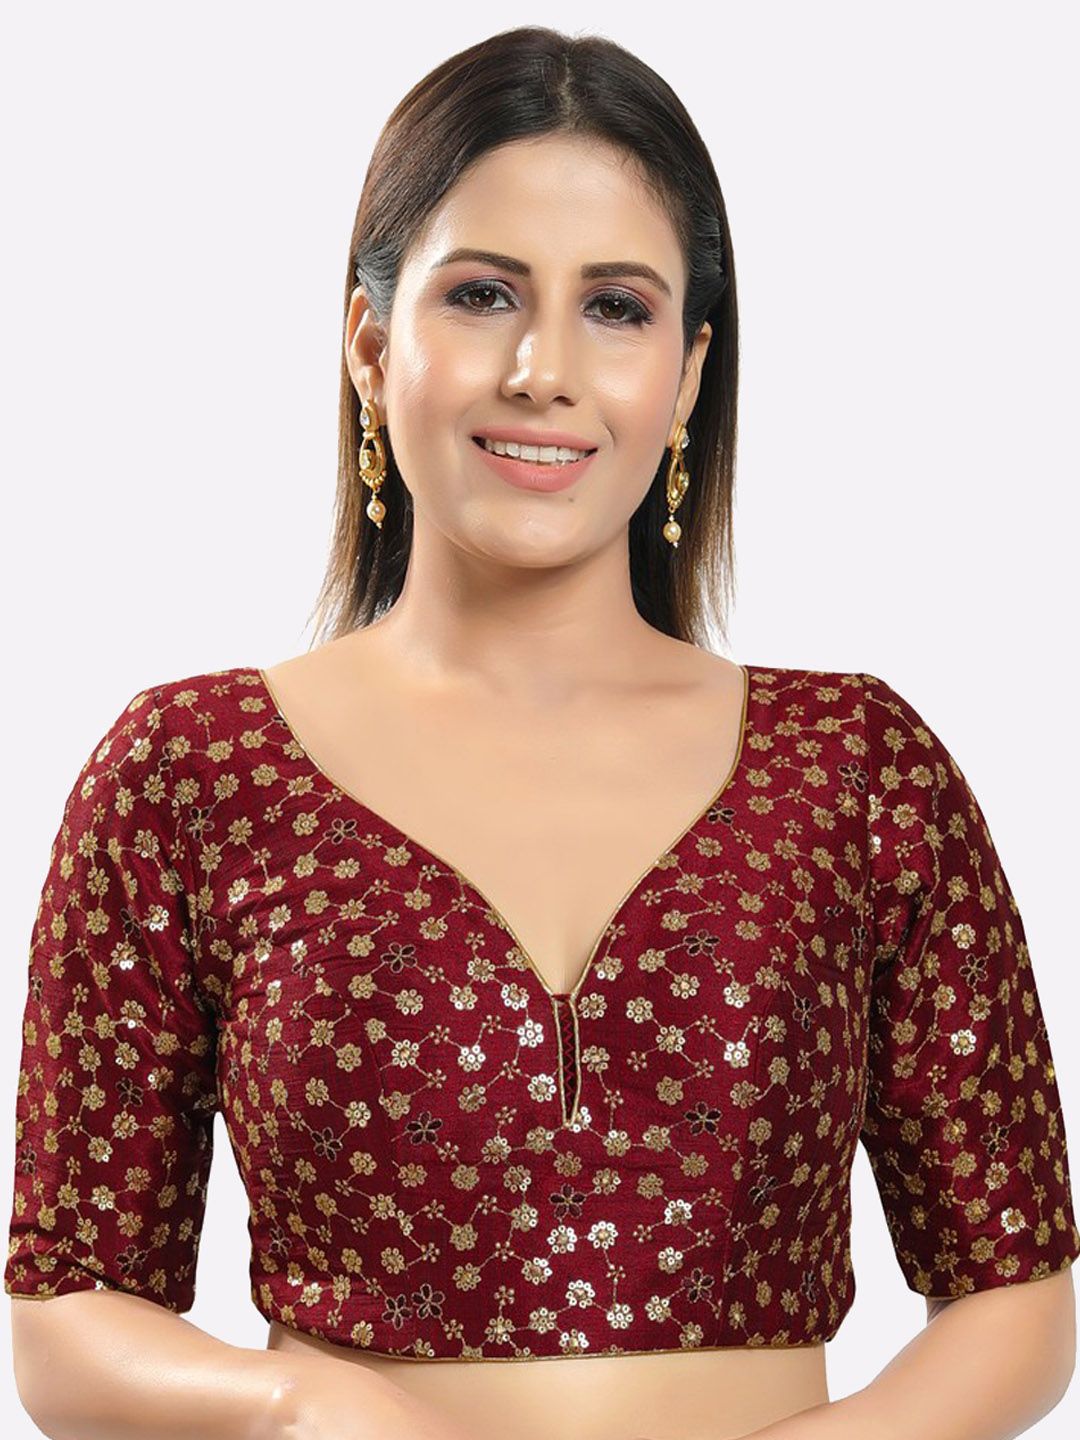 SALWAR STUDIO Women Gold-Toned & Maroon Embroidered Readymade Saree Blouse Price in India